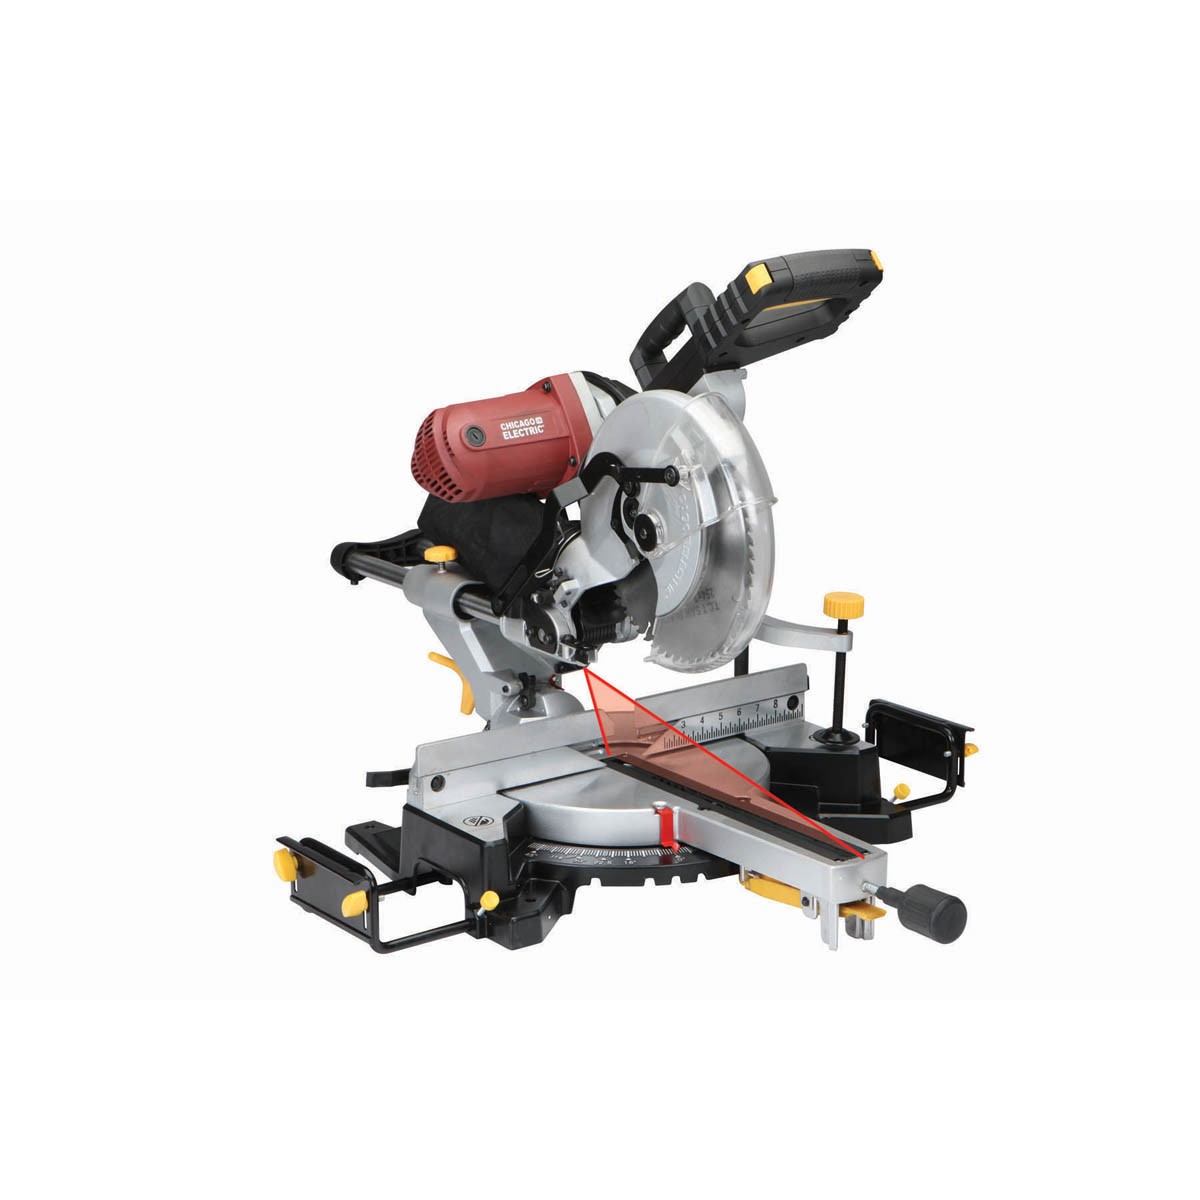 12 In. Double-Bevel Sliding Compound Miter Saw With Laser Guide System